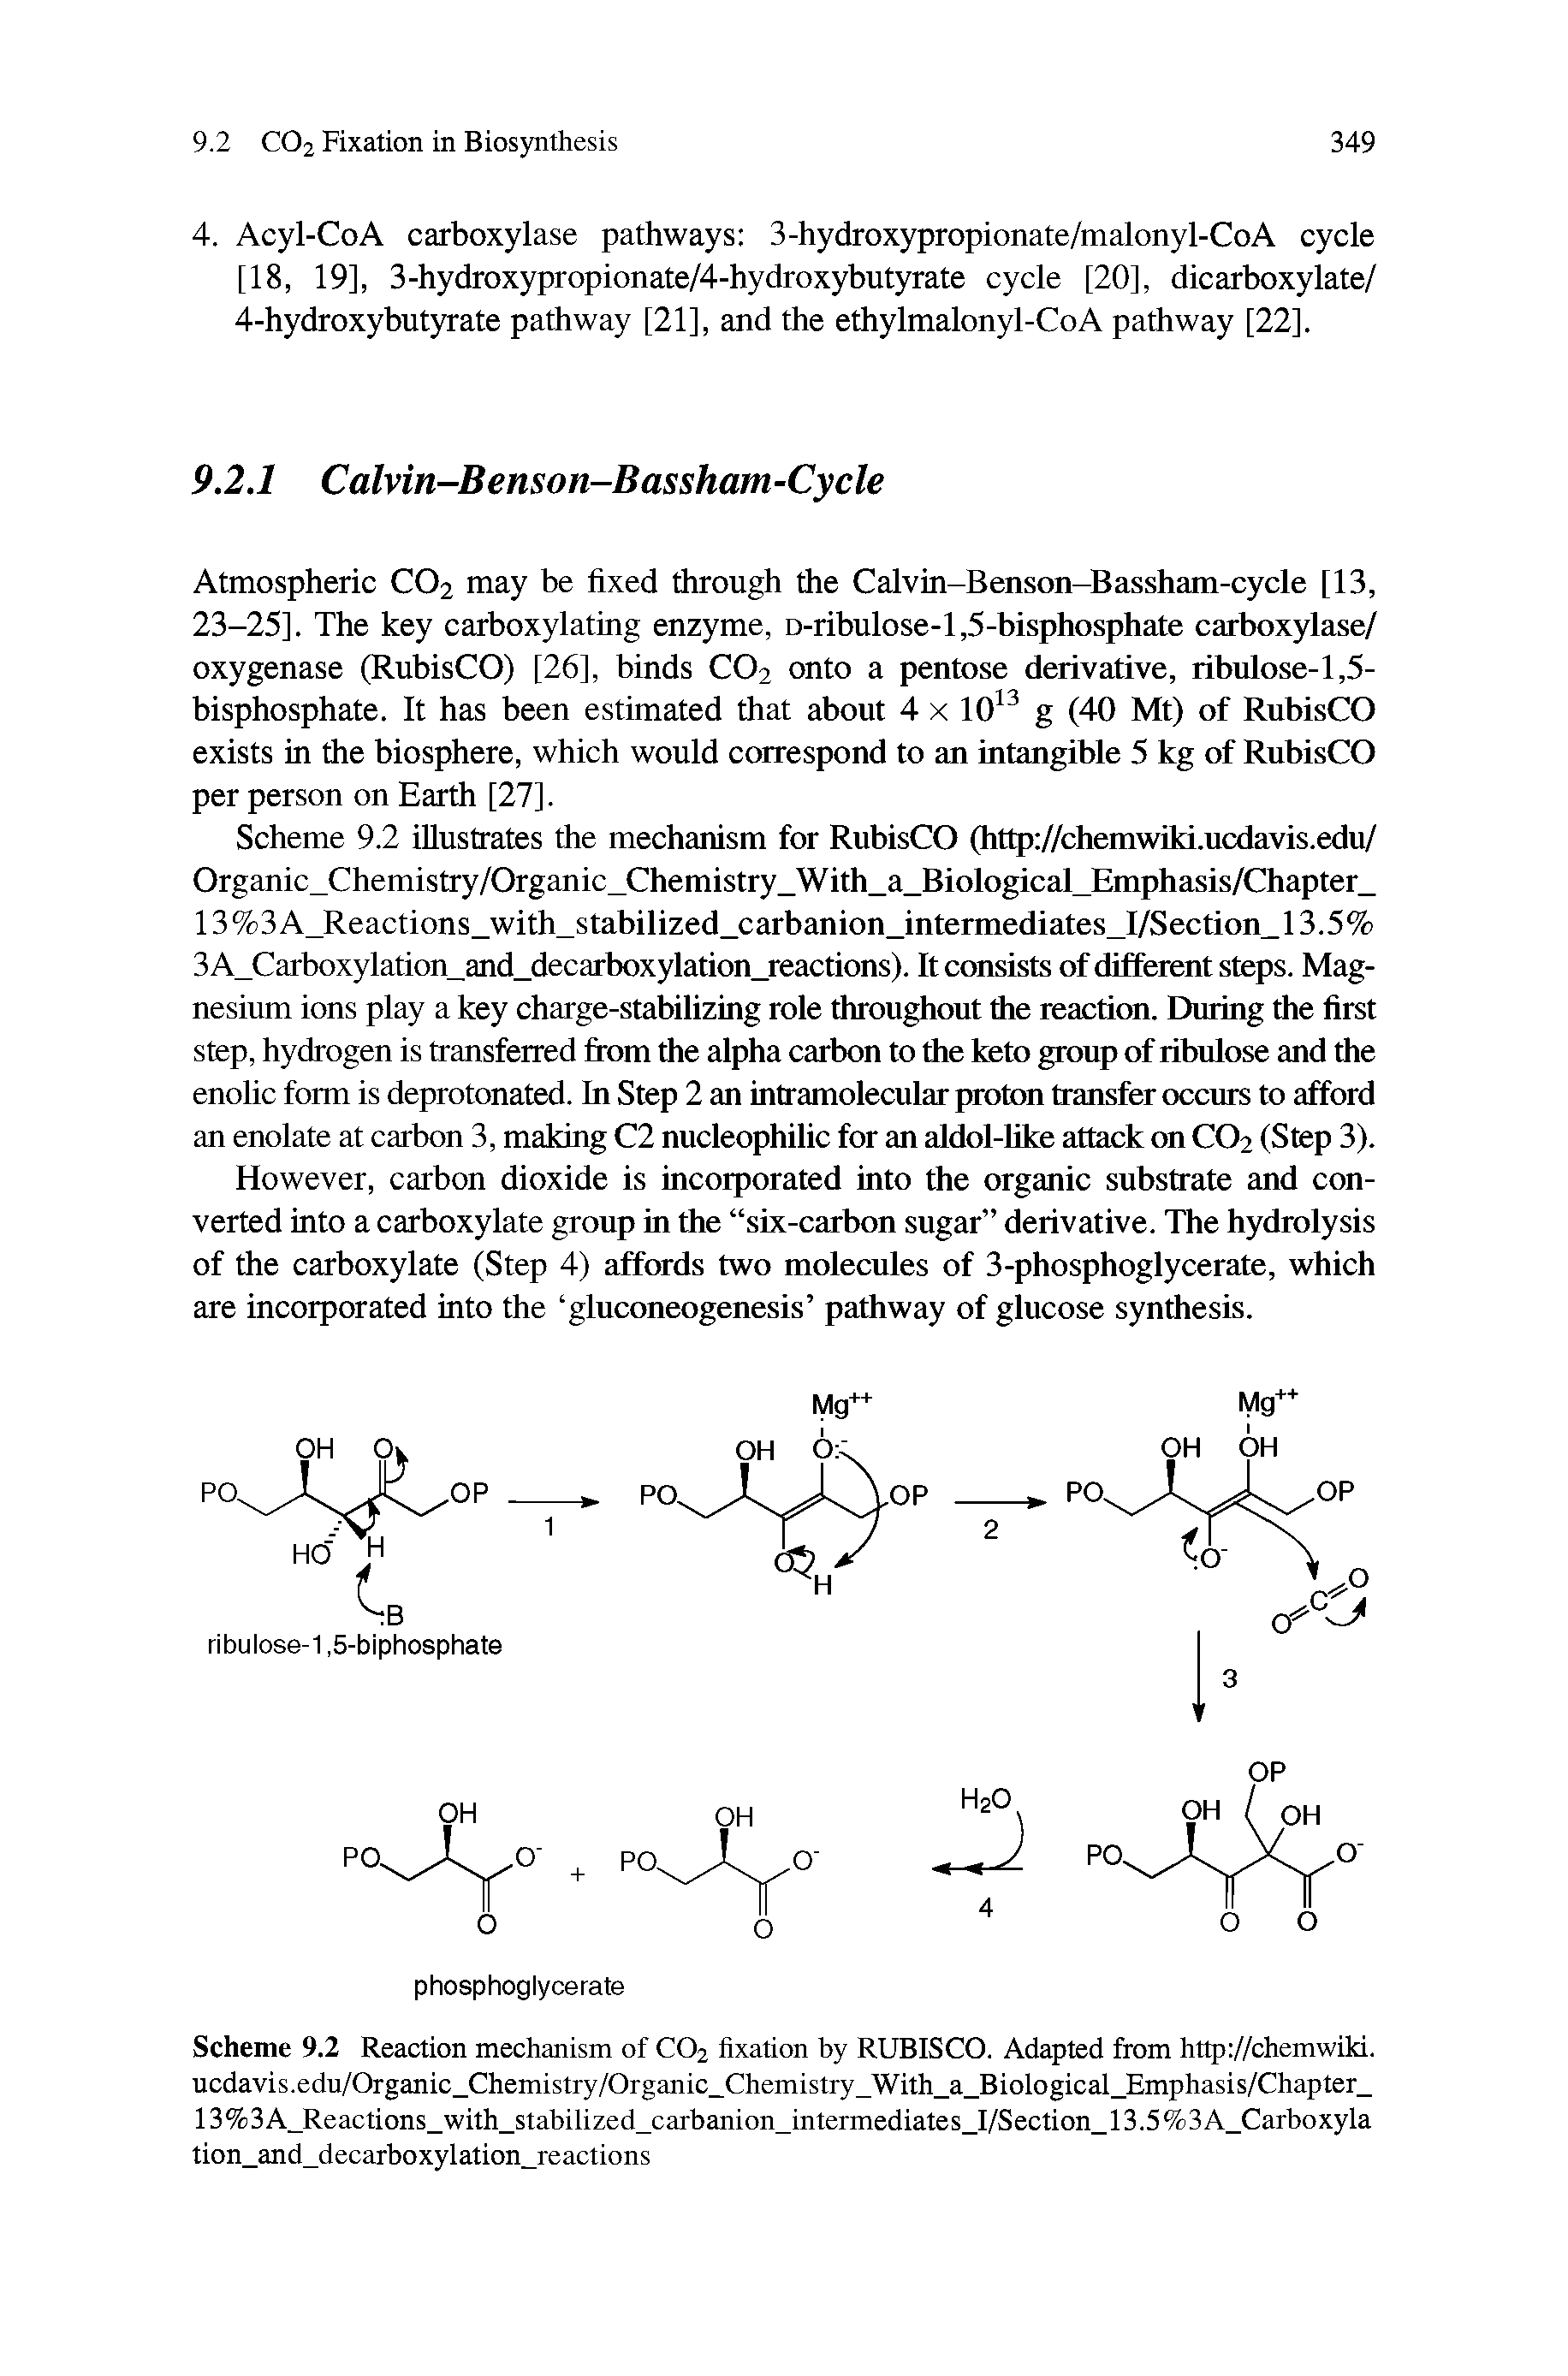 Scheme 9.2 Reaction mechanism of CO2 fixation by RUBISCO. Adapted from http //chemwiki. ucdavis.edu/Organic Chemistry/Organic Chemistry With a BioIogicai Emphasis/Chapter 13%3A Reactions with stabiIized carbanion intermediates I/Section 13.5%3A Carboxyla tion and decarboxyiation reactions...